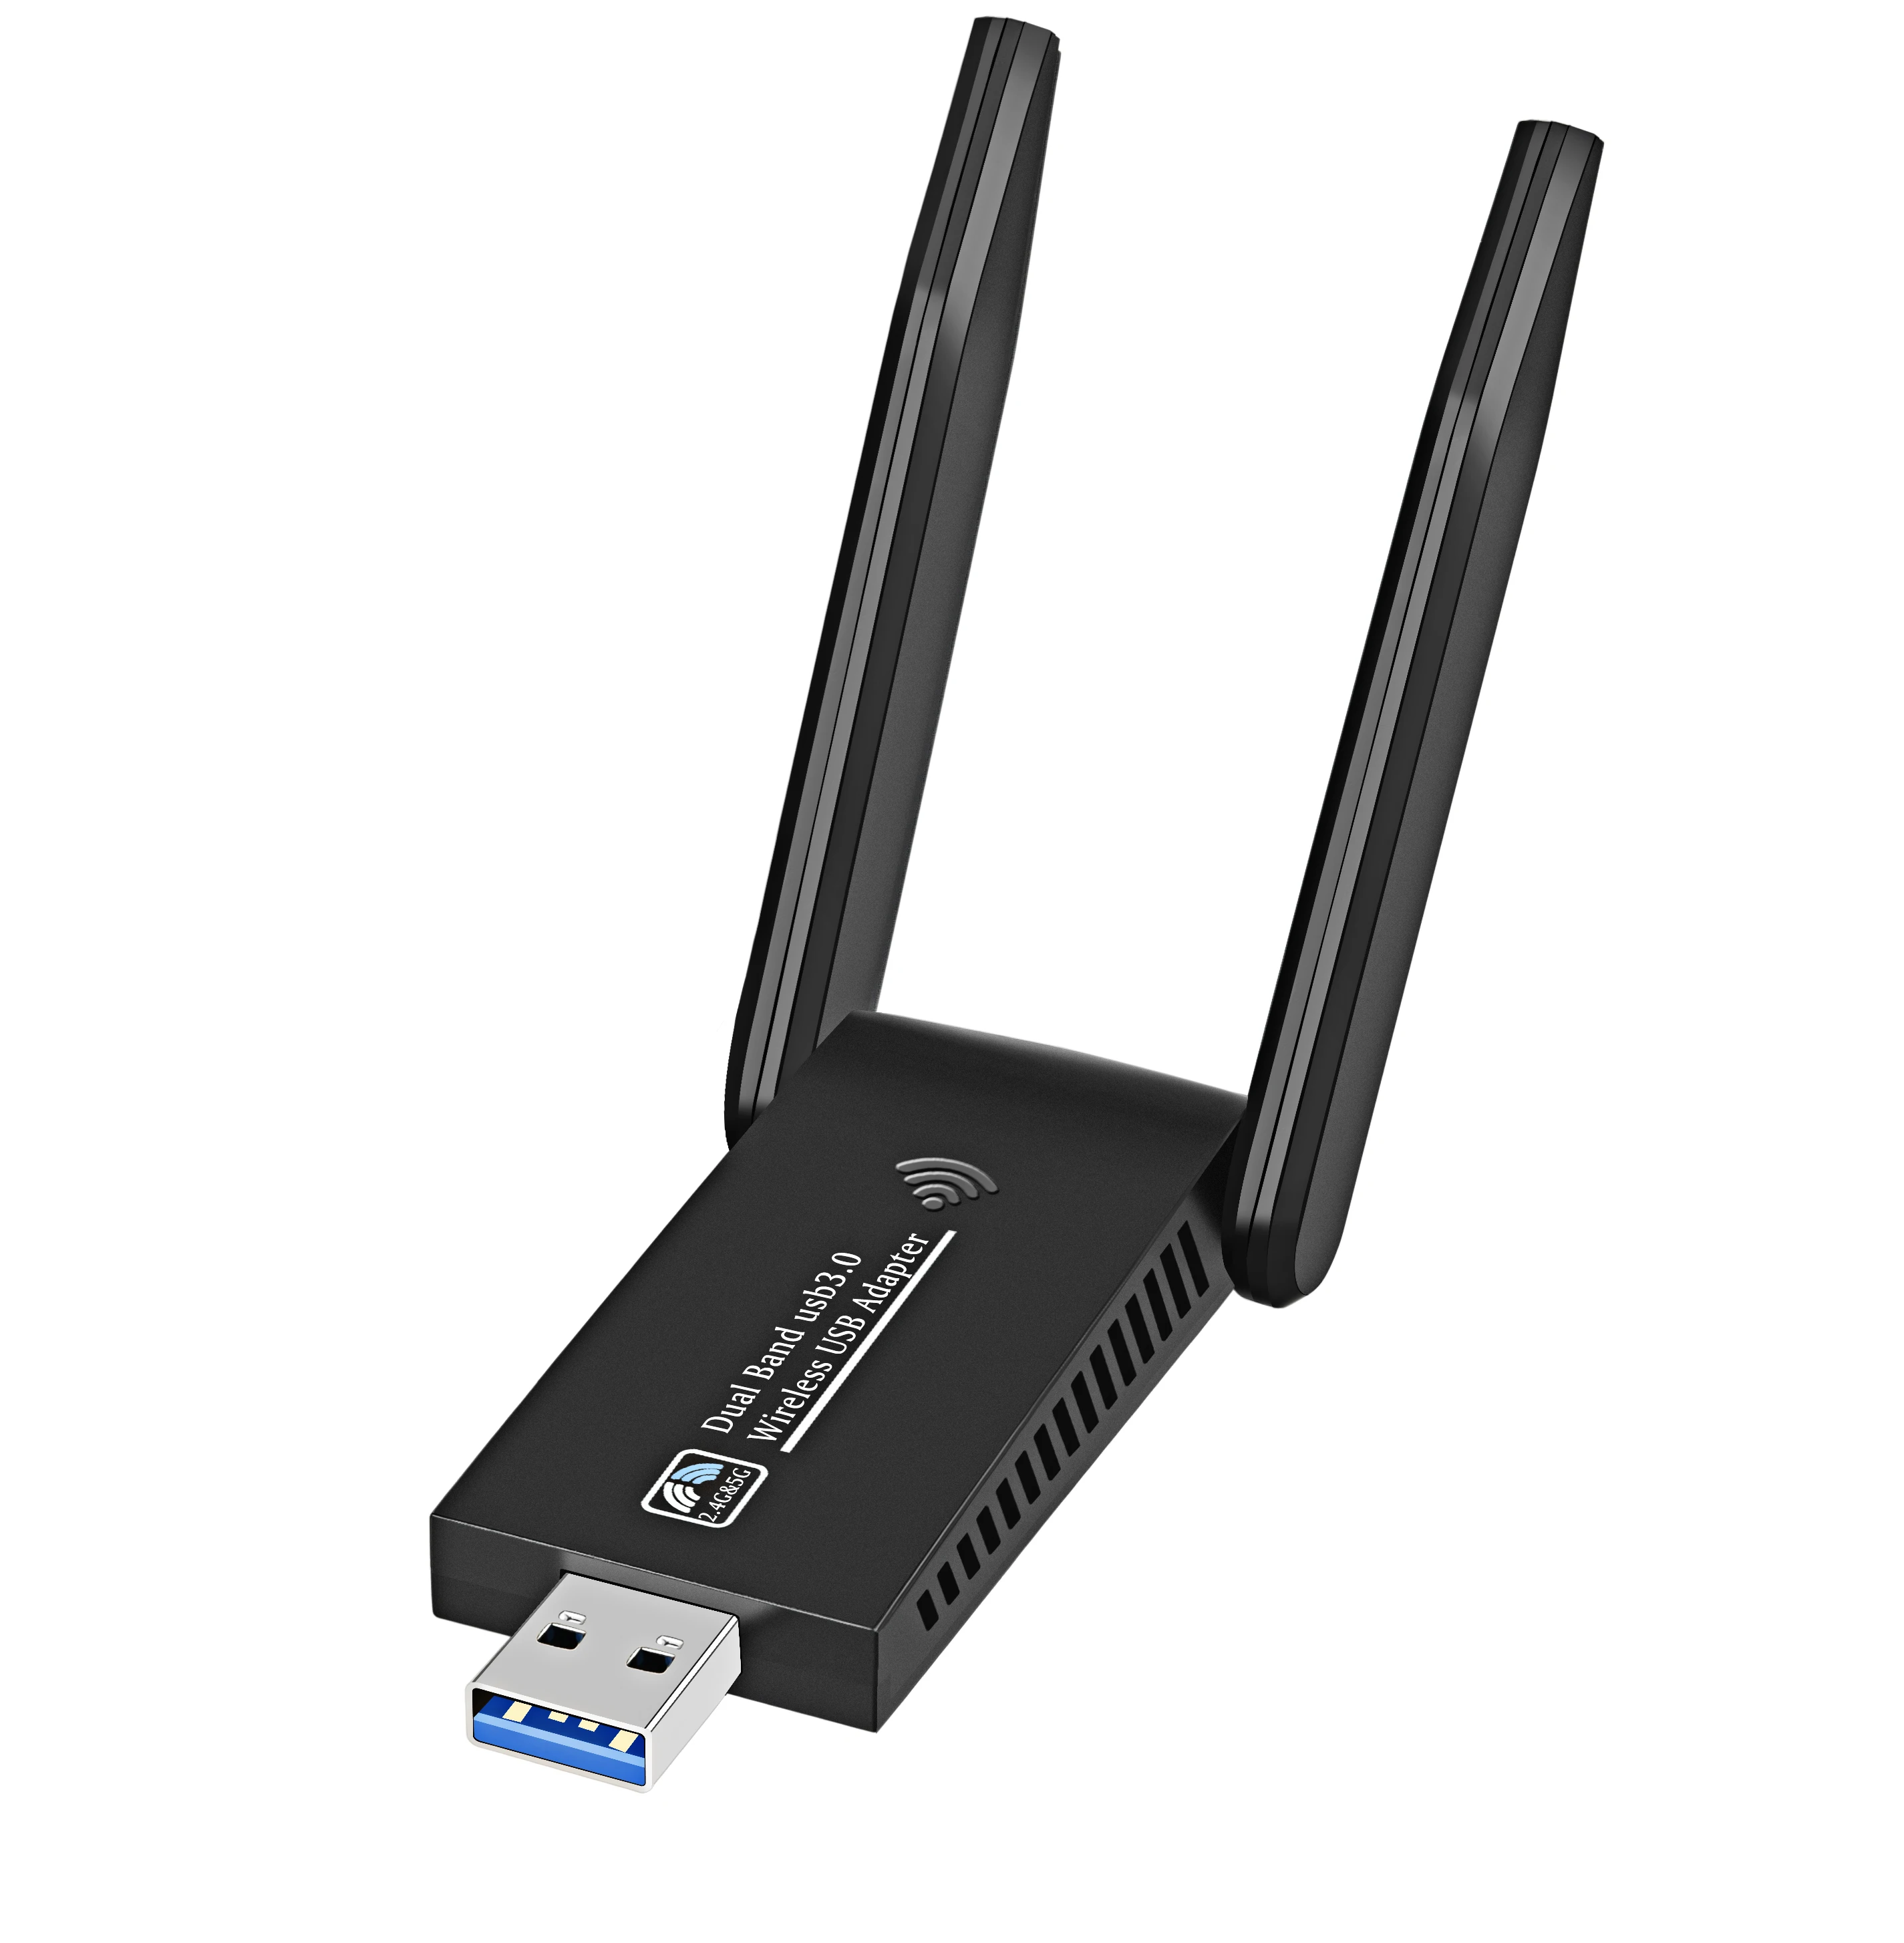 Source USB WiFi Adapter USB 3.0 WiFi 802.11 ac Wireless Network Adapter with Dual Band 2.42GHz/300Mbps 5.8GHz/866Mbps on m.alibaba.com